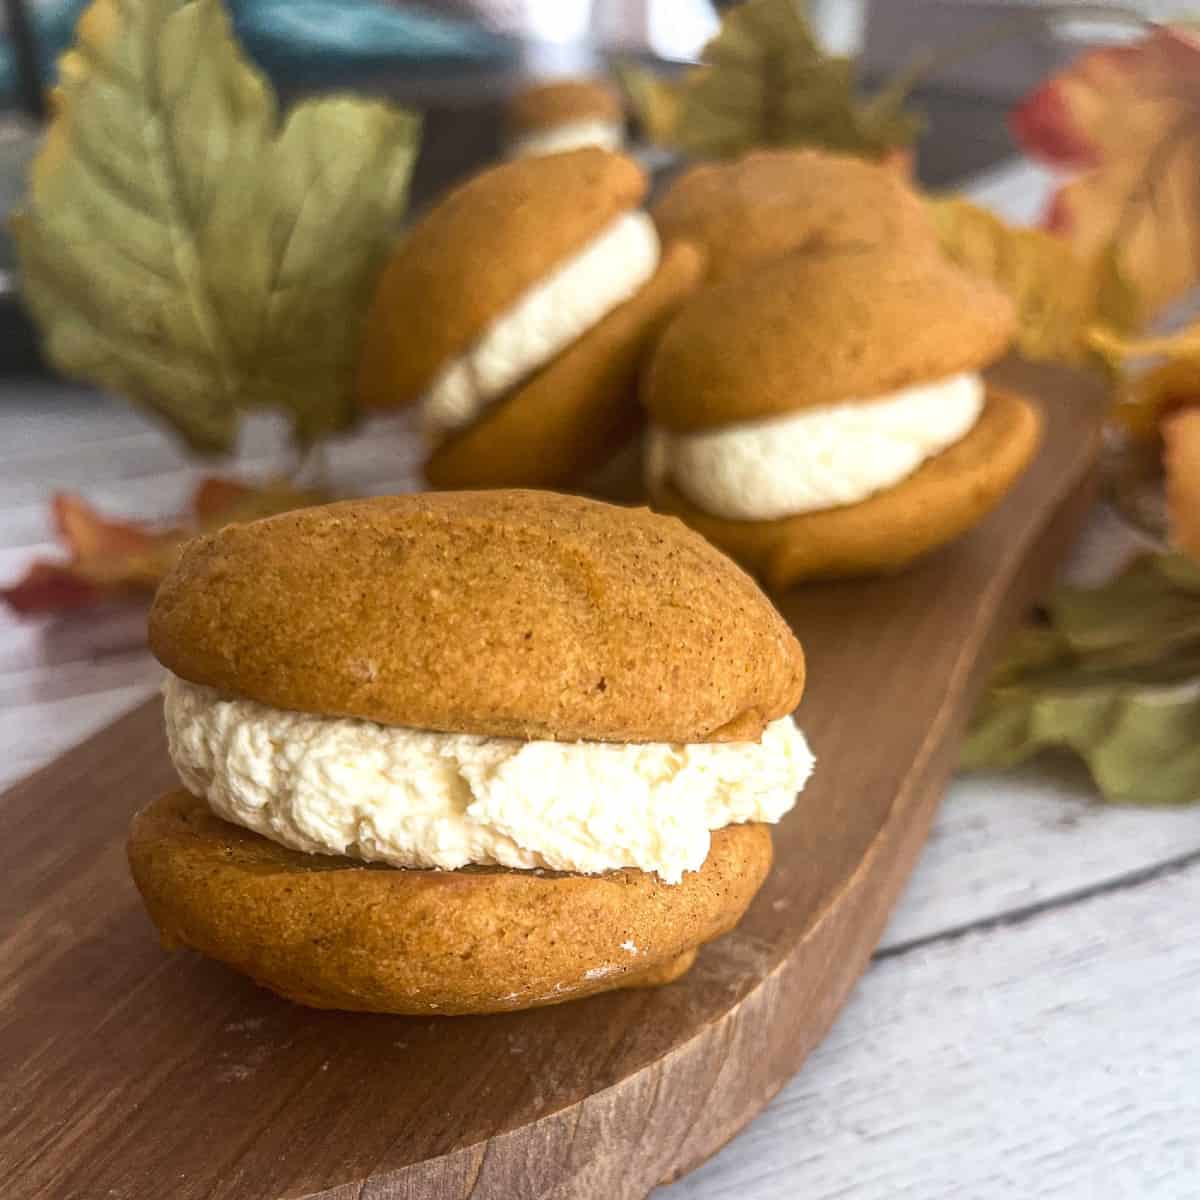  close-up photograph of two Pumpkin Whoopie Pies stacked on top of each other. The pies consist of two soft, cake-like cookies with a rich, creamy cream cheese frosting filling in between. The cookies are a deep, golden-brown color, and the frosting is generously spread between them.